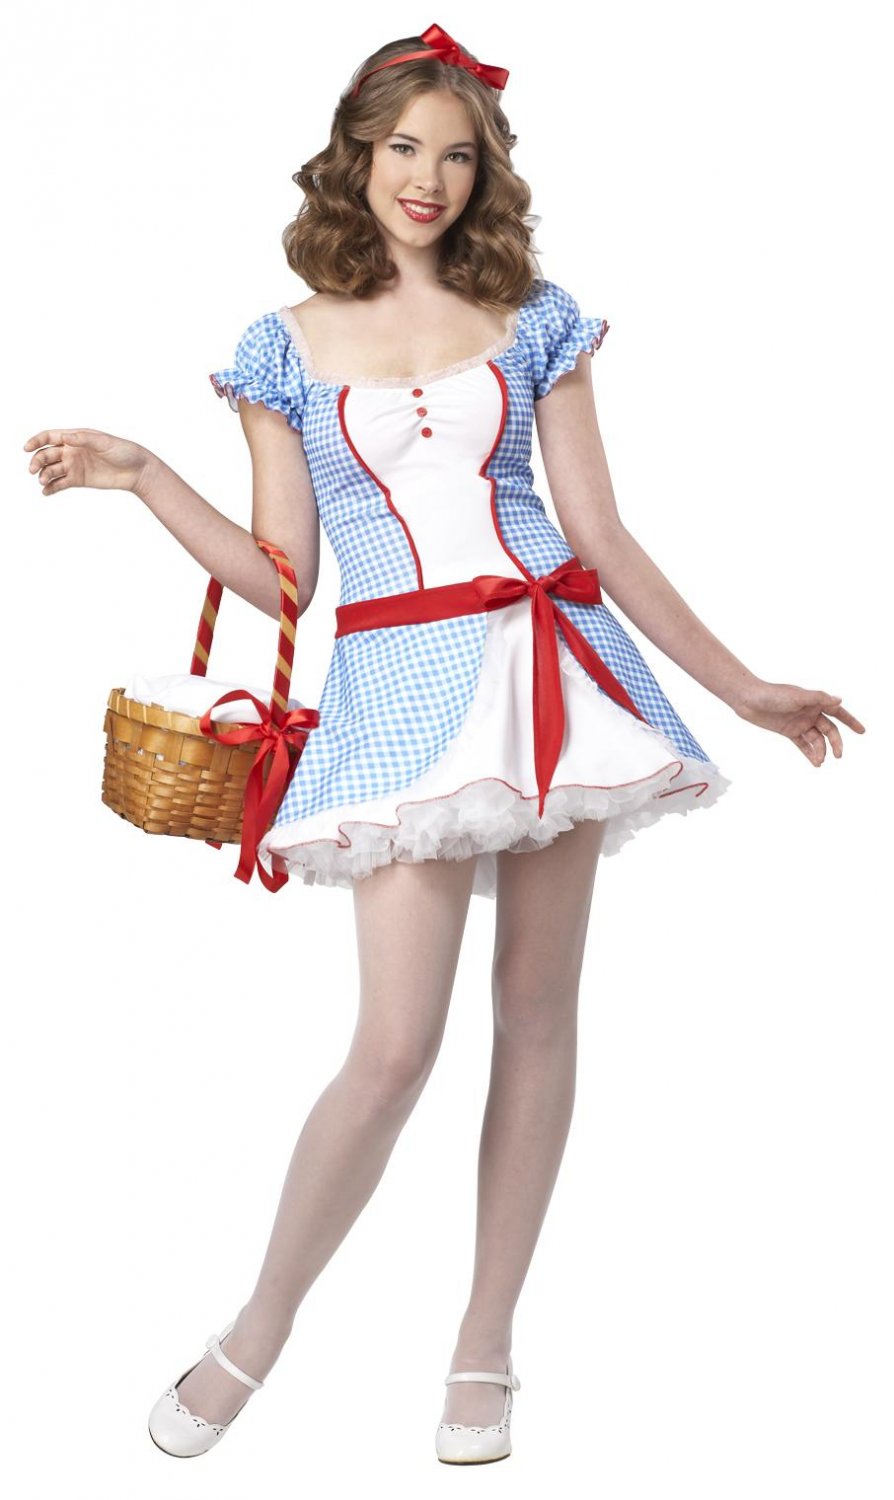 Size: Jr (7-9) #05051 Dorothy, Wizard of Oz Teen Costume.